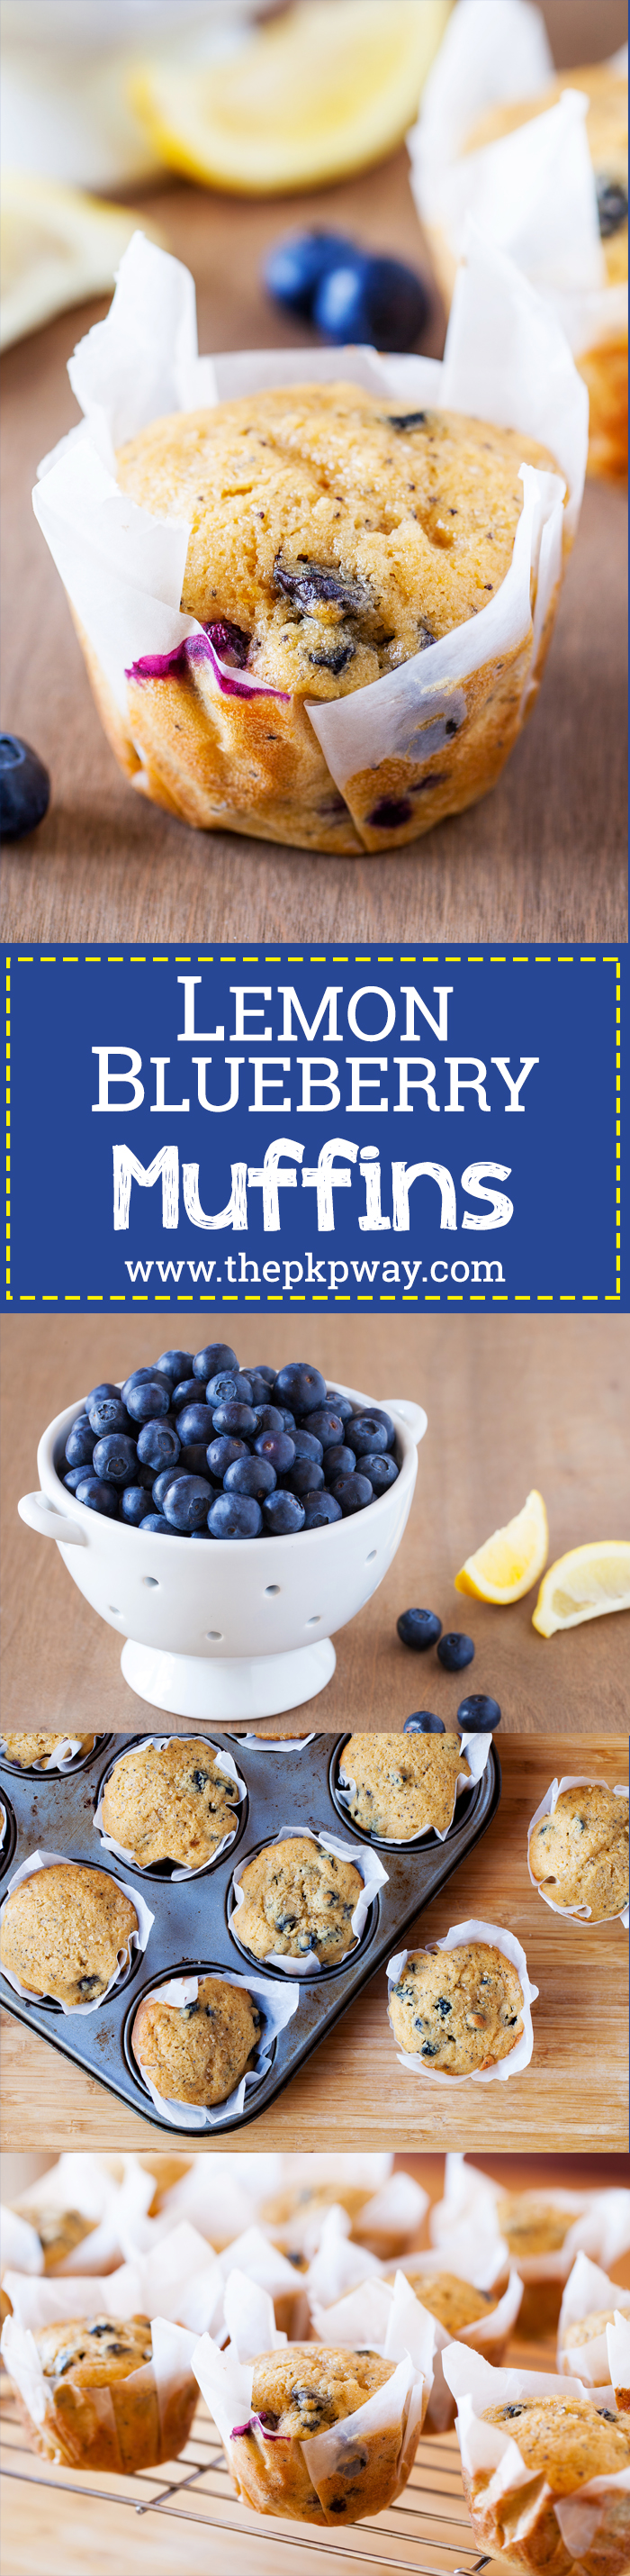 These blueberry lemon muffins are ultra moist, have a punch of lemon flavor, and pops of juicy blueberries in every bite. 